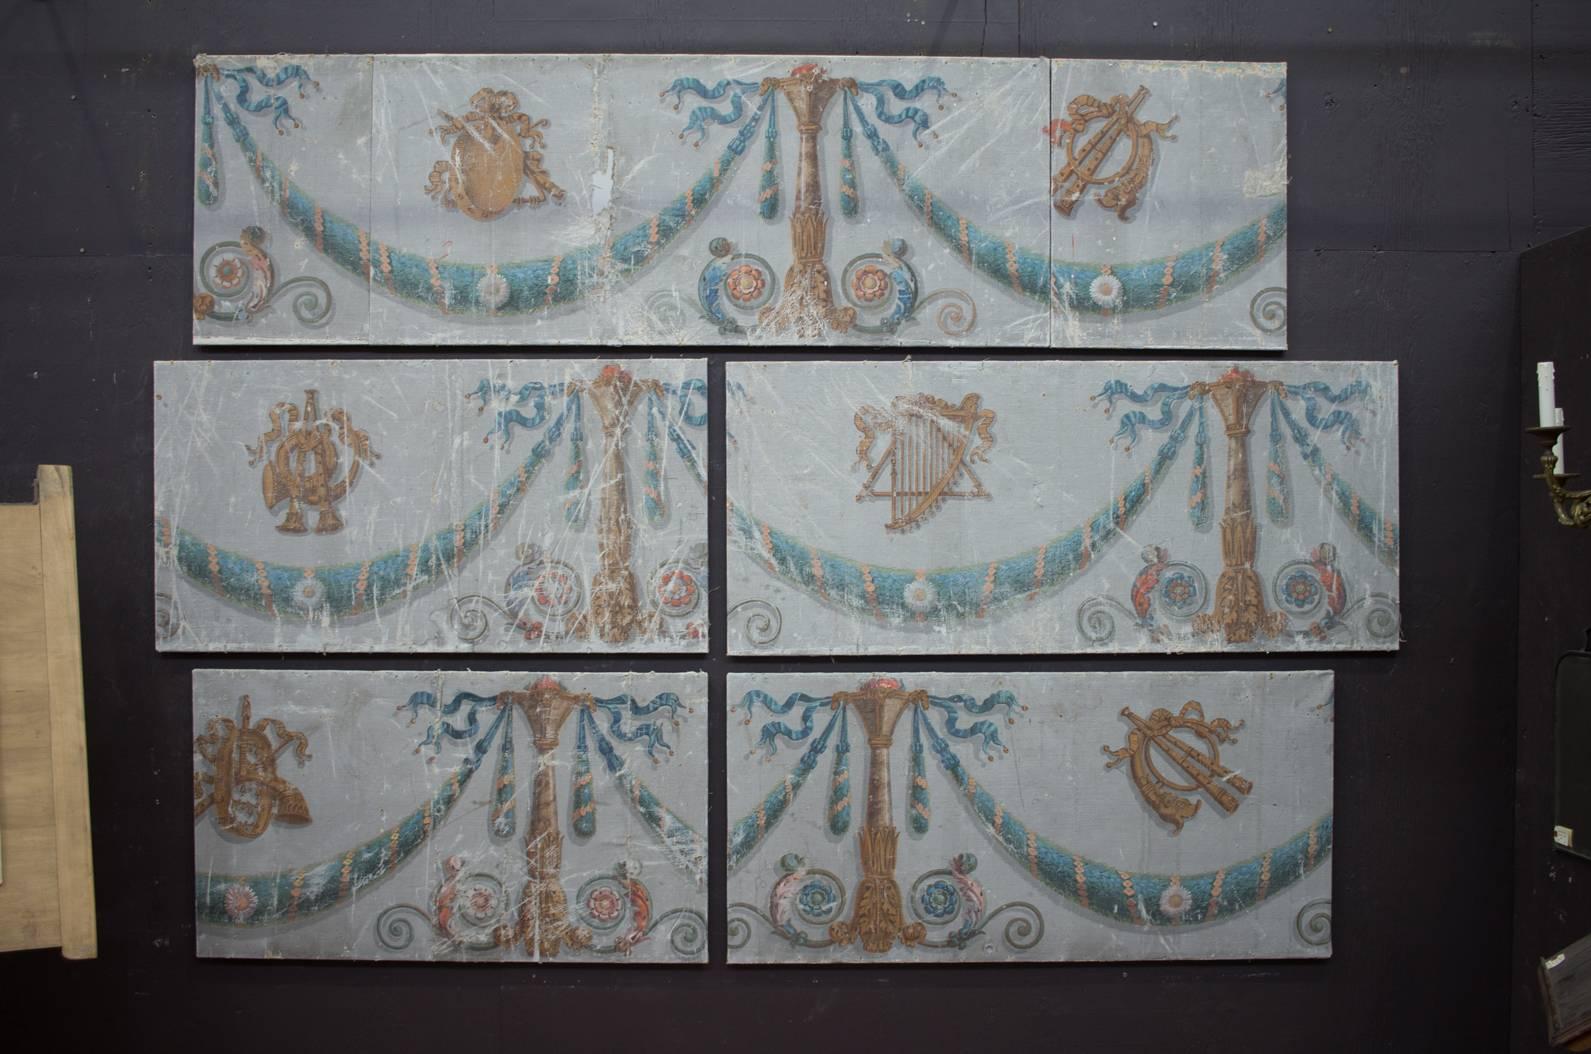 A rare set of seven 18th century Rococo hand-painted French painted canvas panels. 

They likely originated in a theatre as the paintings are adorned with ancient musical instruments including horns and harps. Beautiful muted colors.